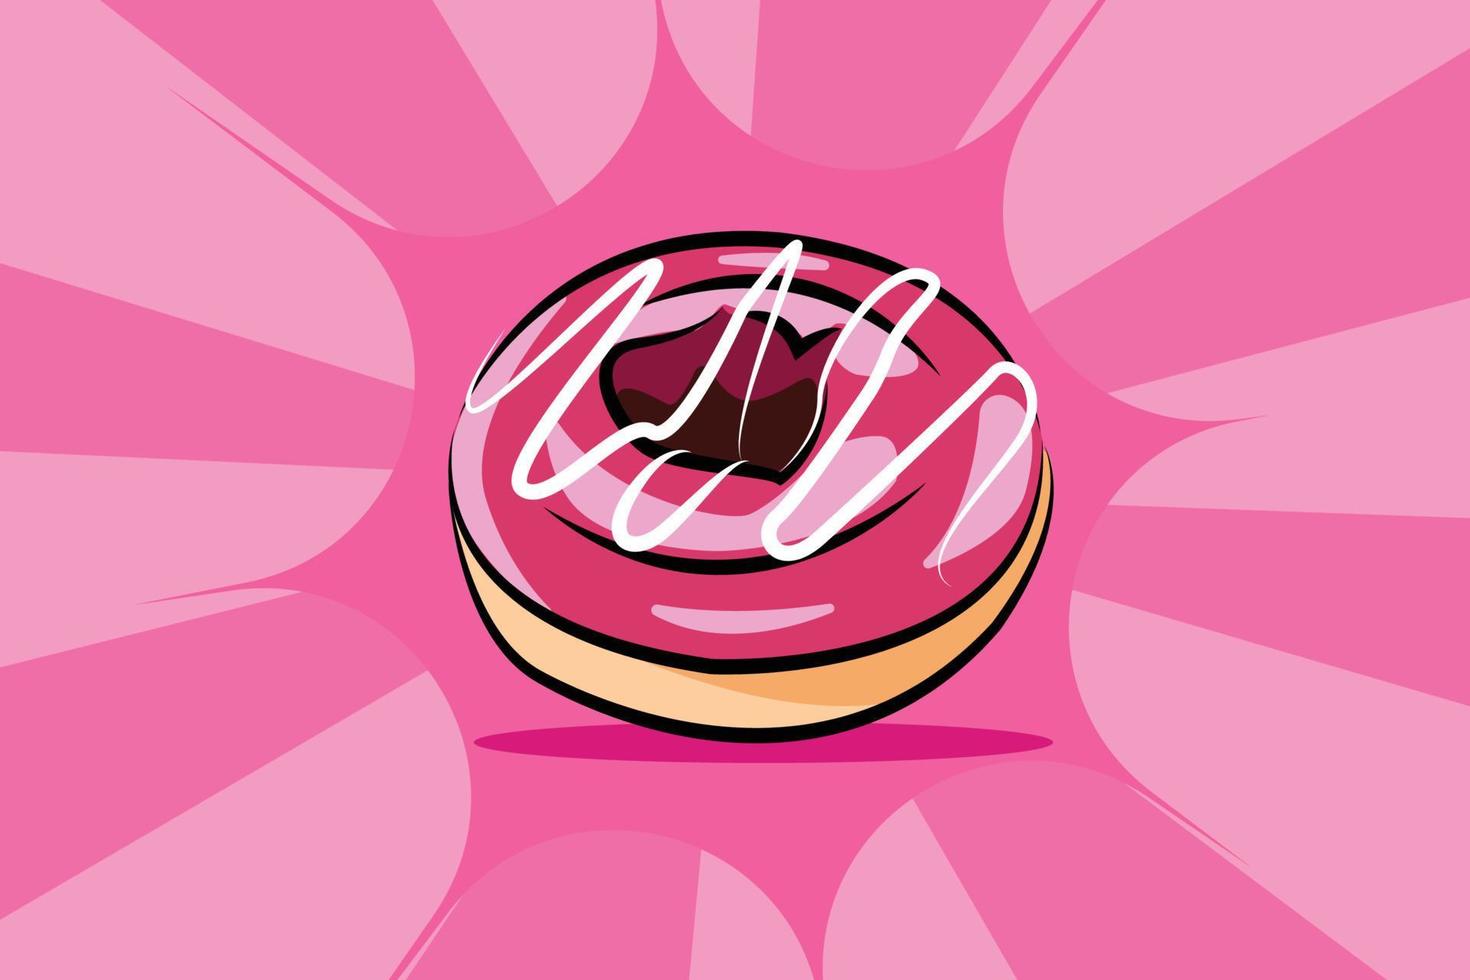 Sweet Donut cartoon with pink background. vector illustration